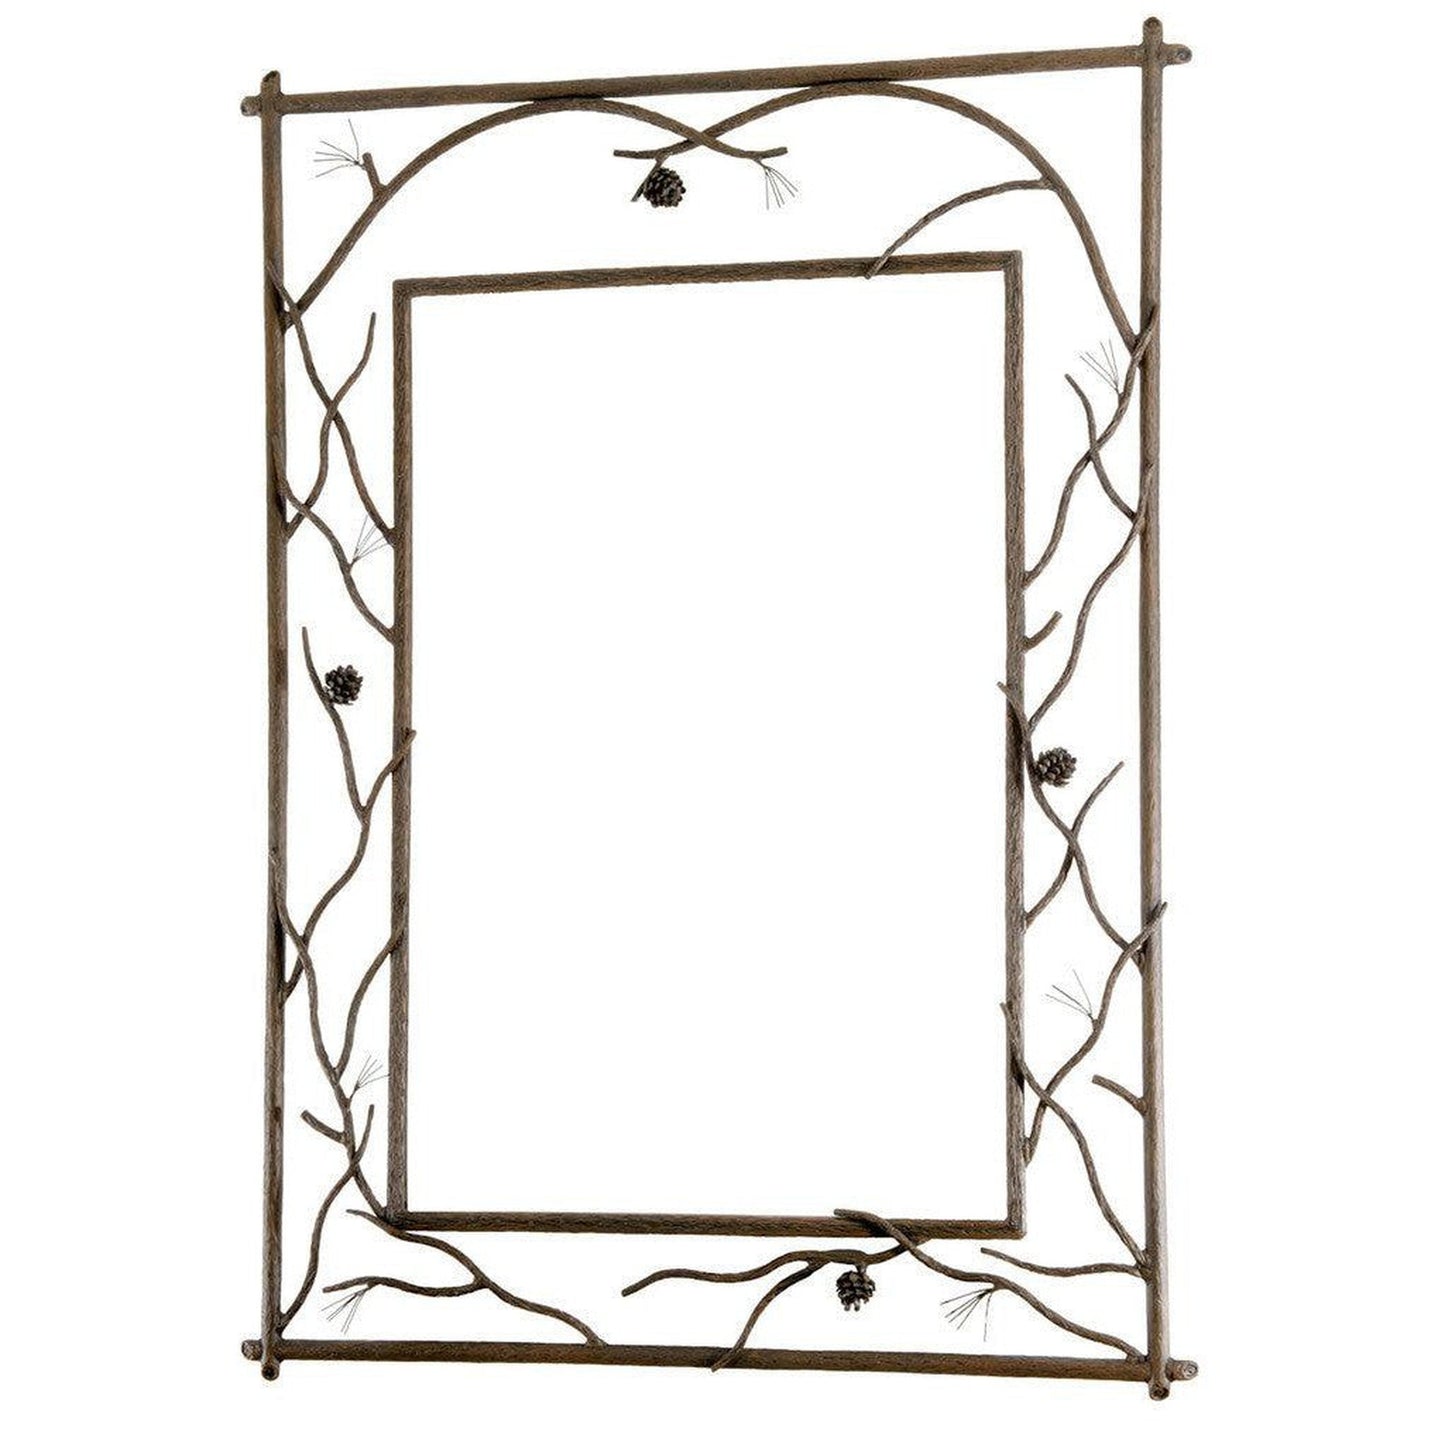 Stone County Ironworks Pine 29" x 35" Small Burnished Gold Branched Iron Wall Mirror With Copper Iron Accent